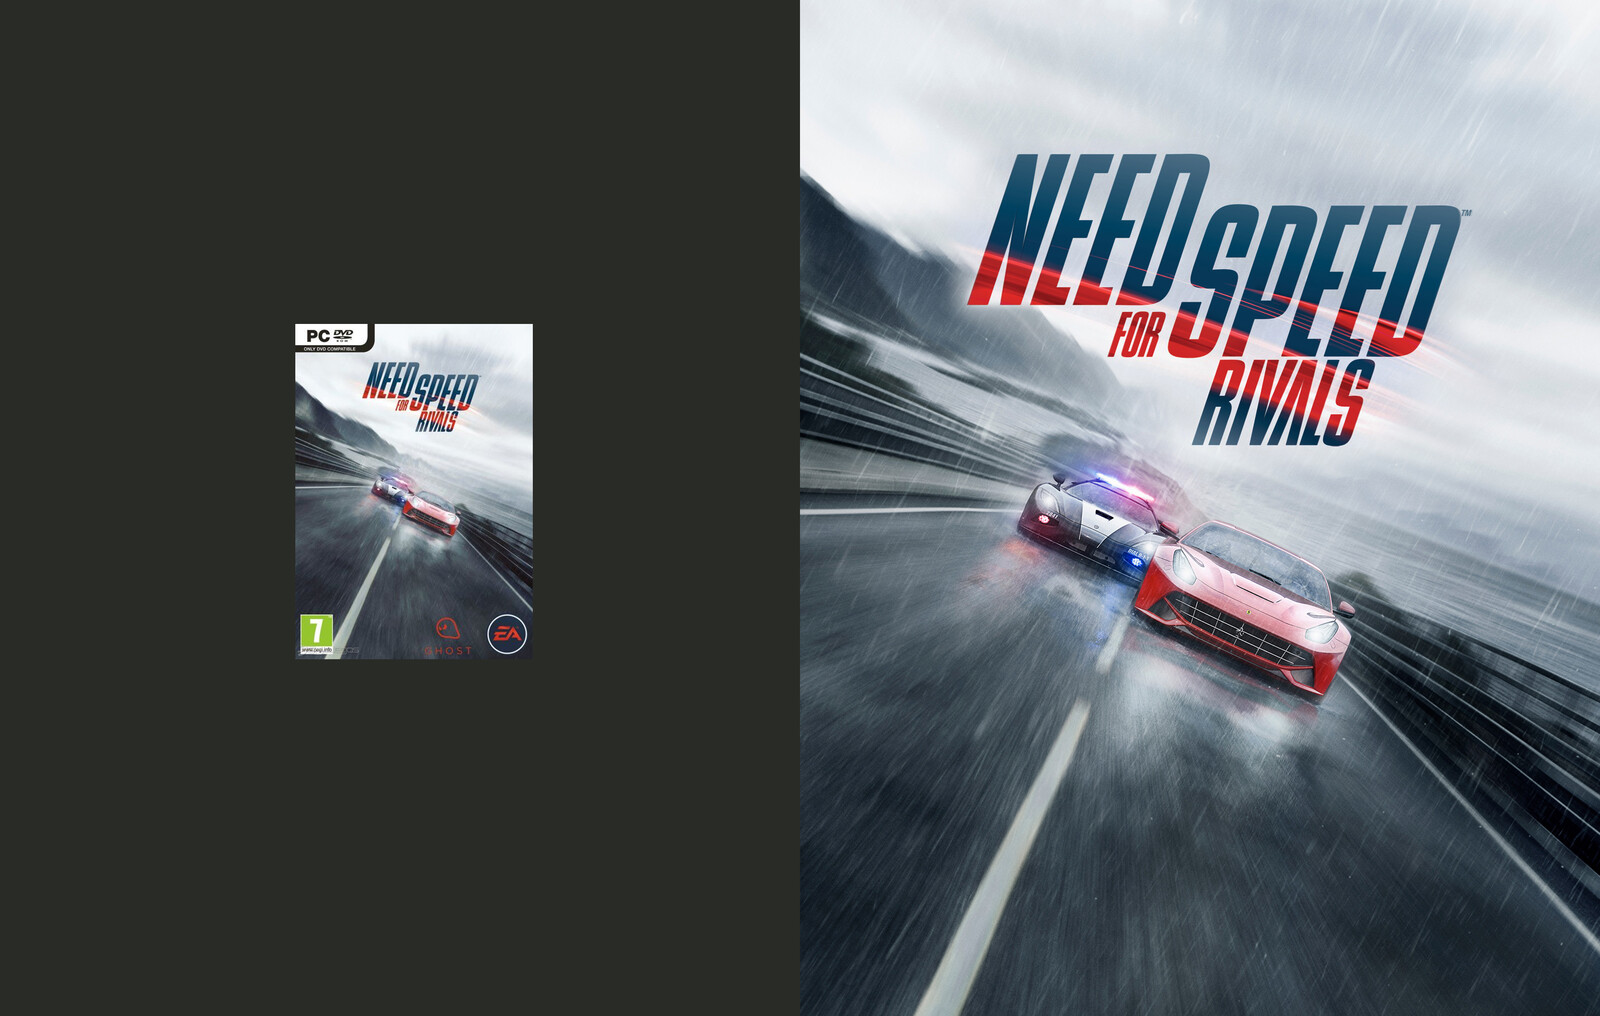 Need for Speed Rivals (Original Scan vs. Poster format)